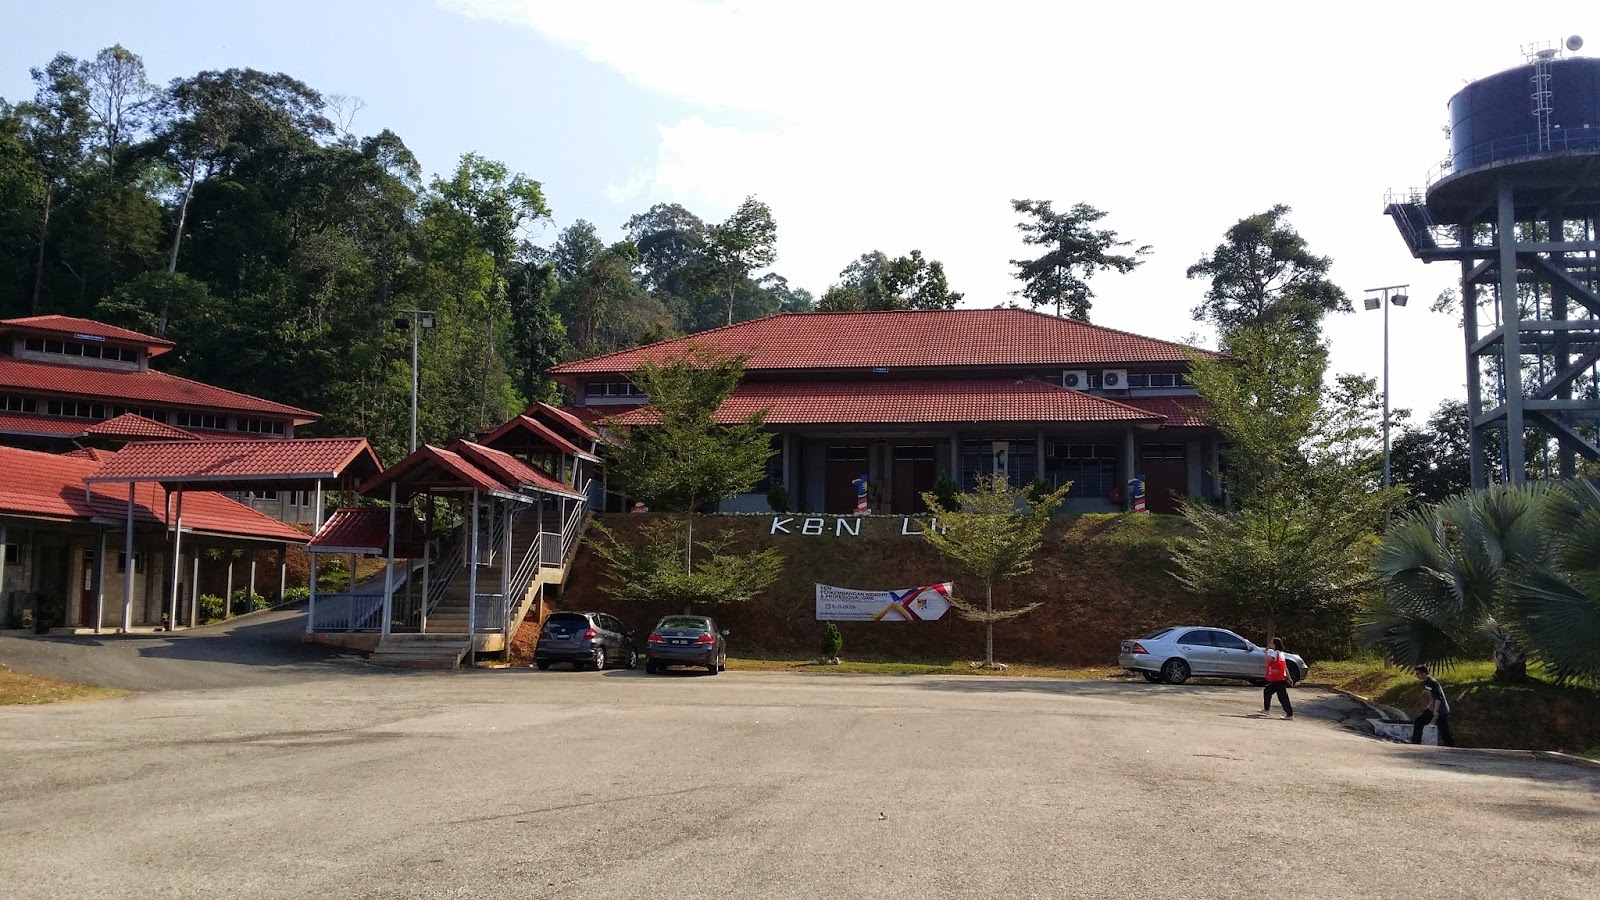 Blogging from suateng...: Kuala Lipis revisited